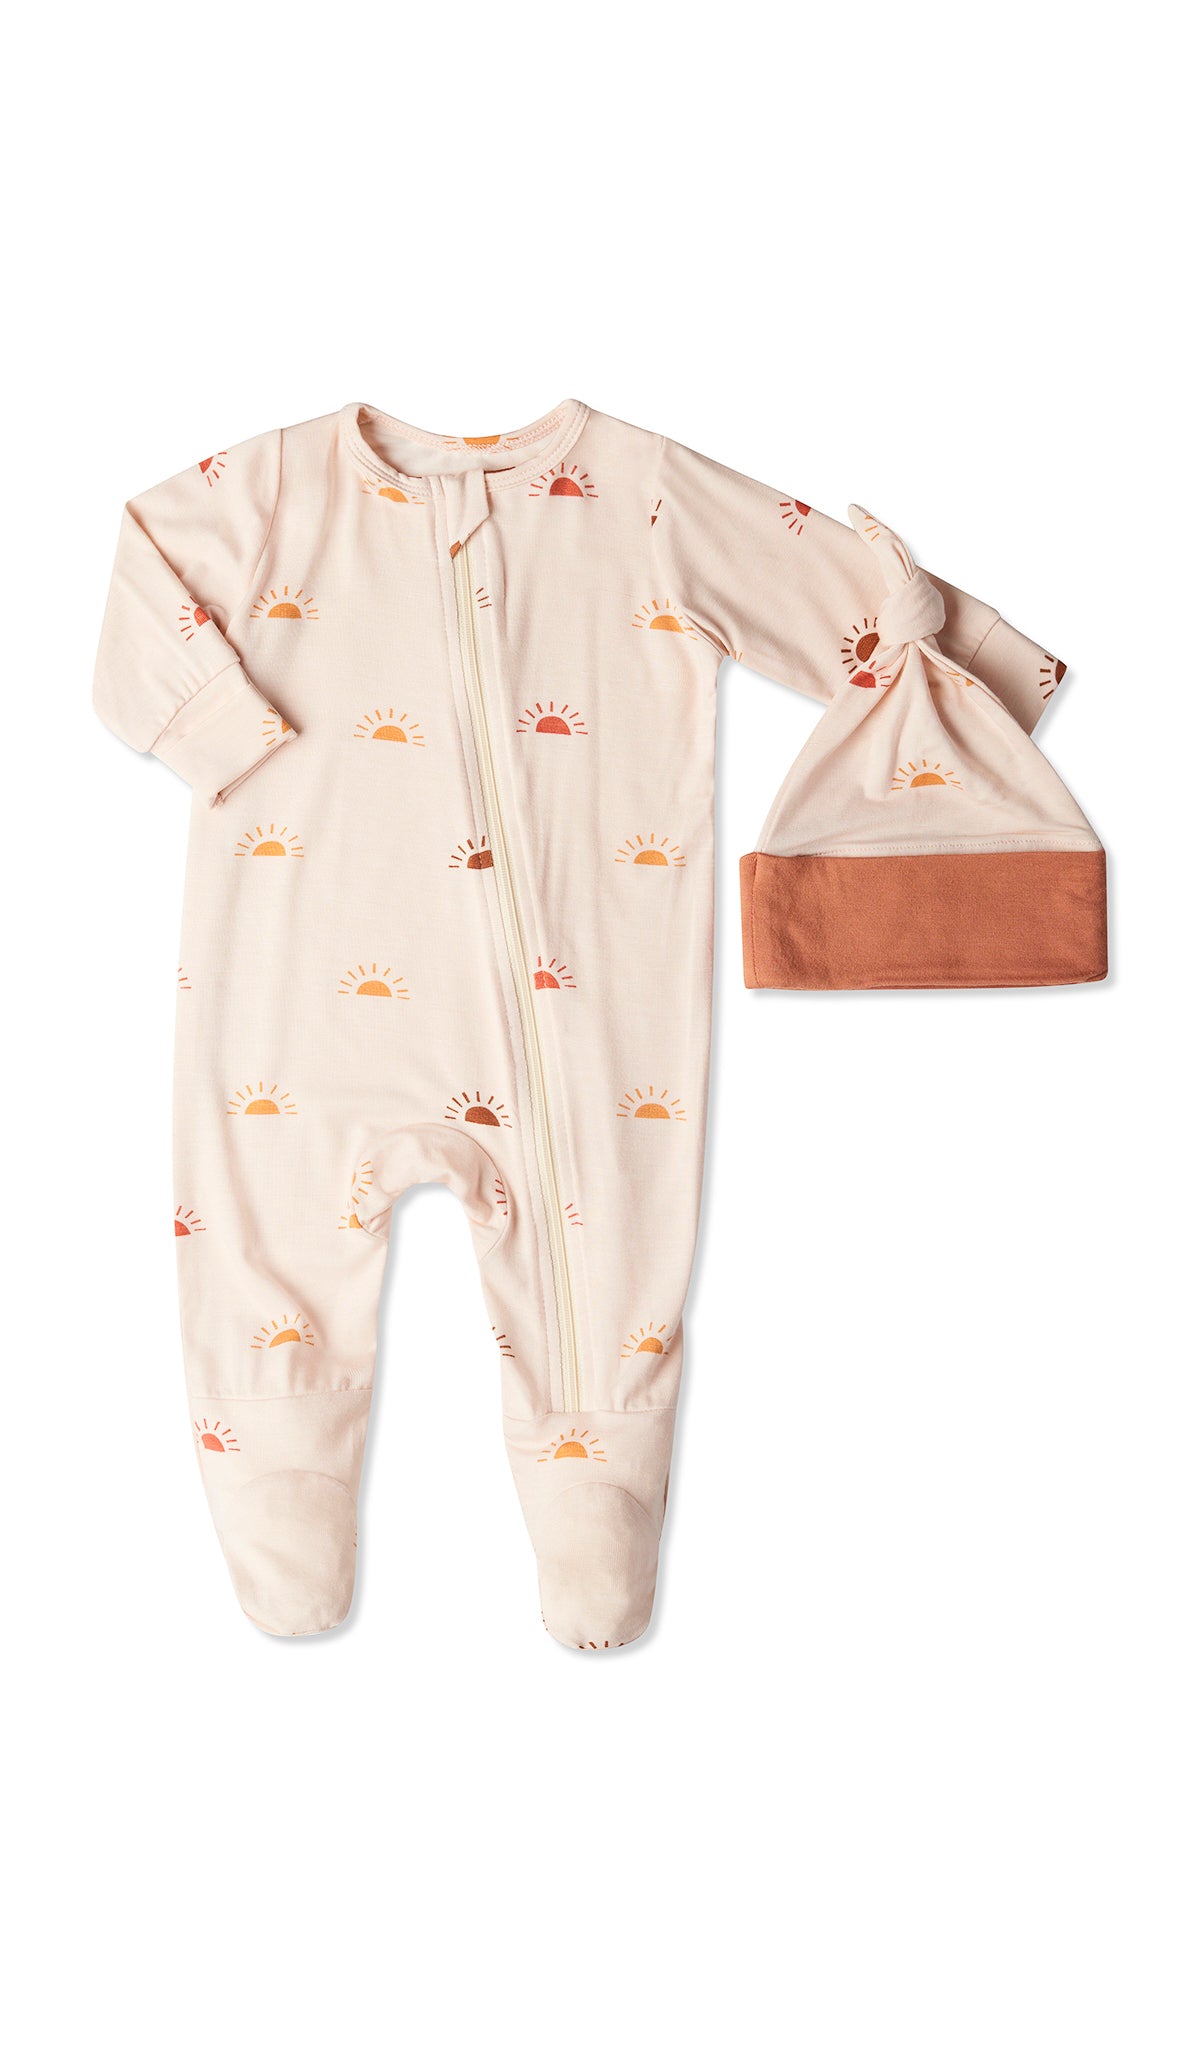 Sunrise Footie 2-Piece with long sleeves, zip front and matching knotted baby hat.